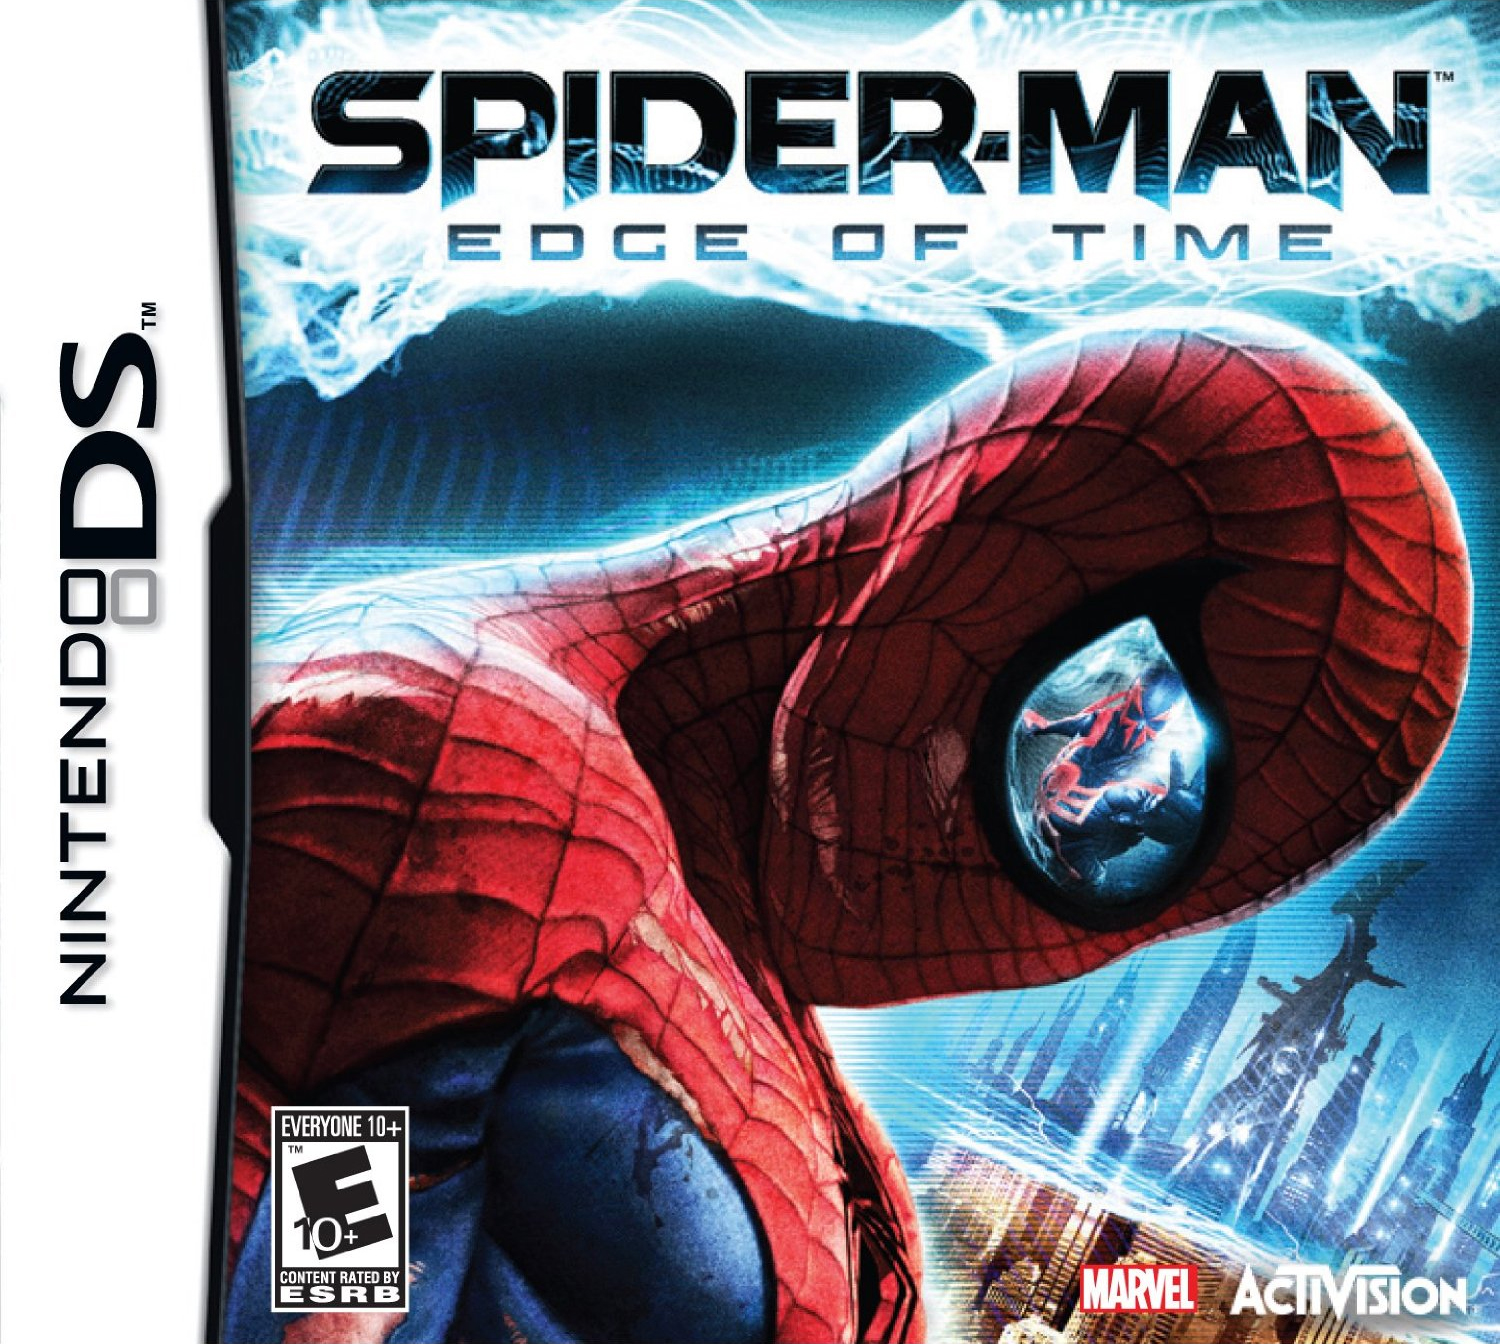 Spider-Man Edge of Time - Nintendo DS - image 1 of 1